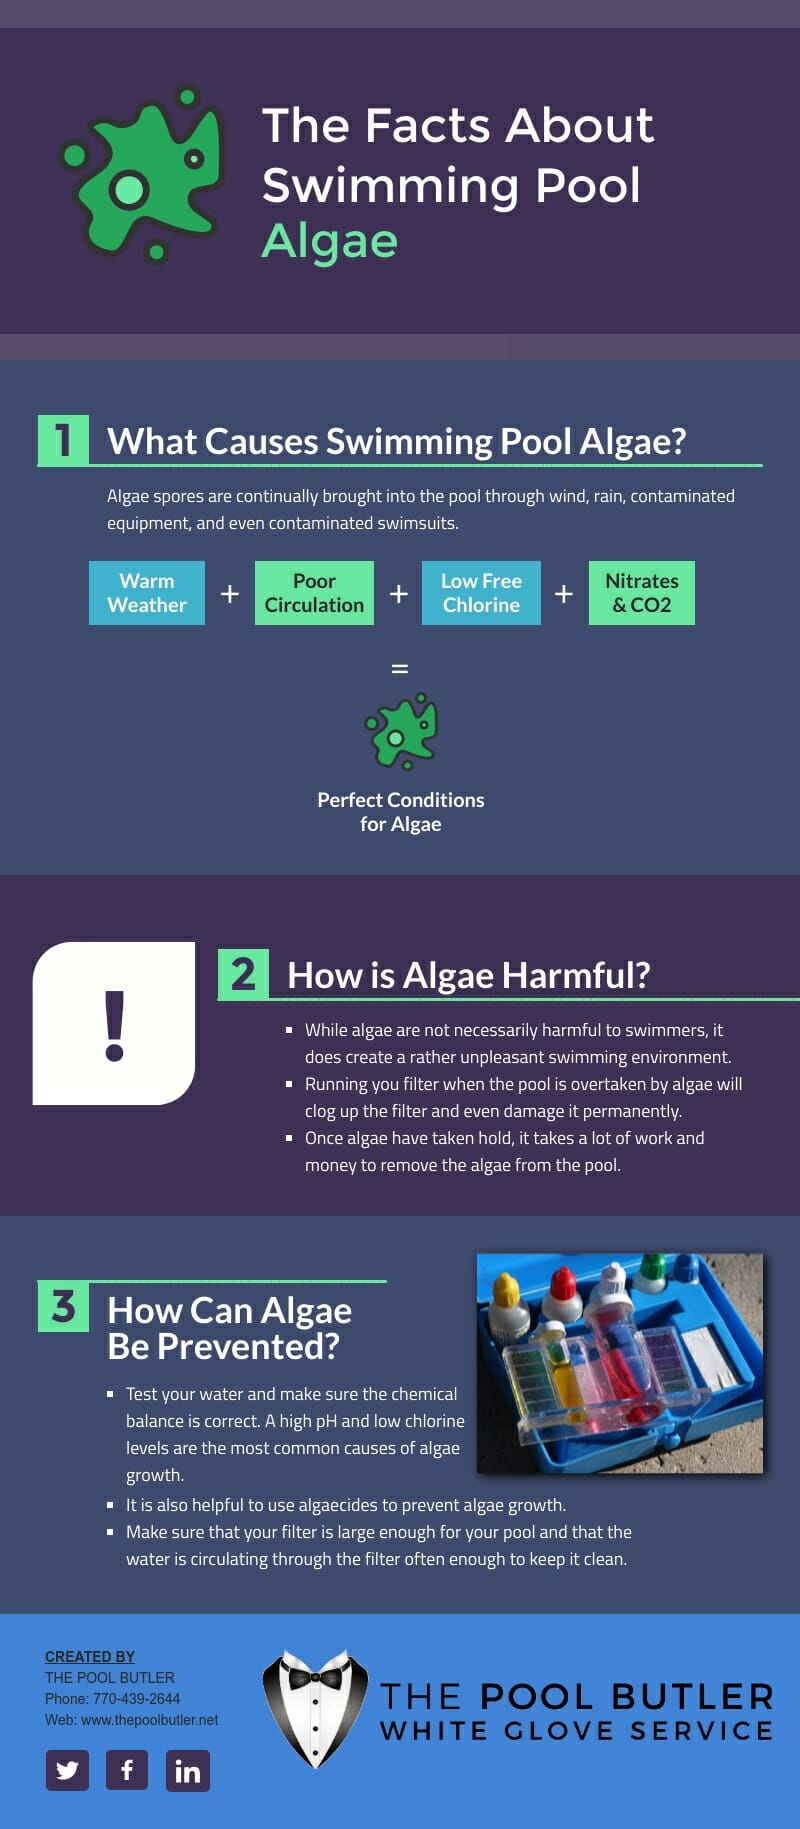 The Facts About Swimming Pool Algae [infographic]